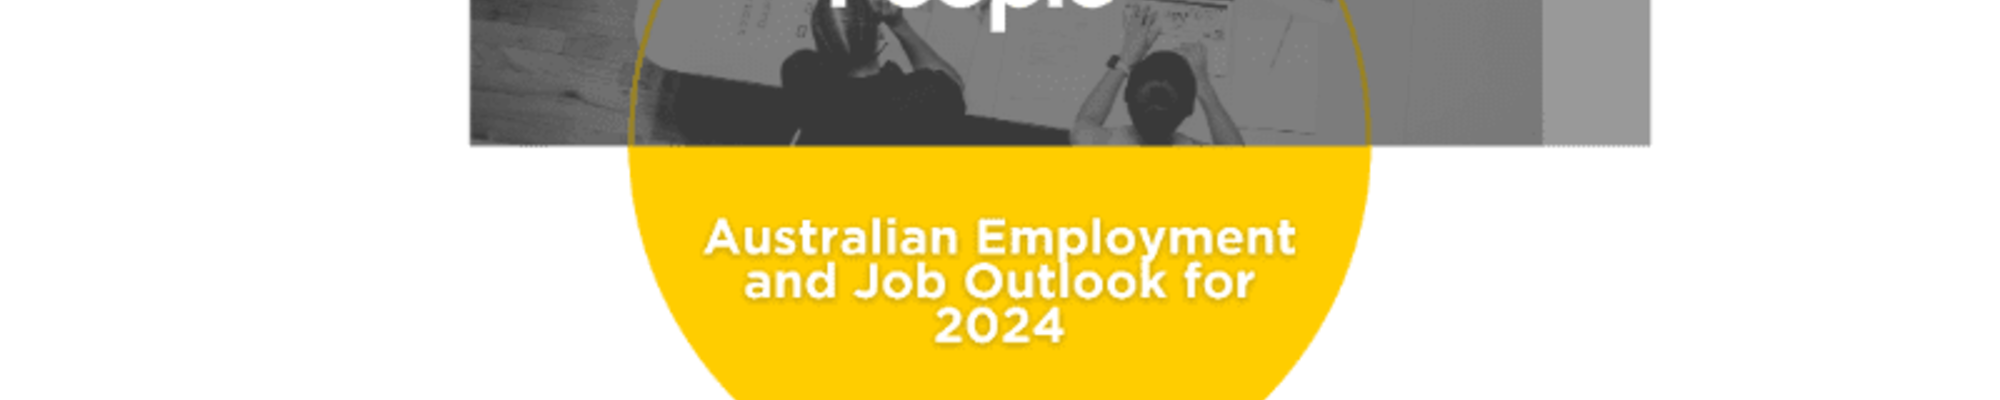 Thumbnail for the cover of our 2024 Employment Job Outlook Report 